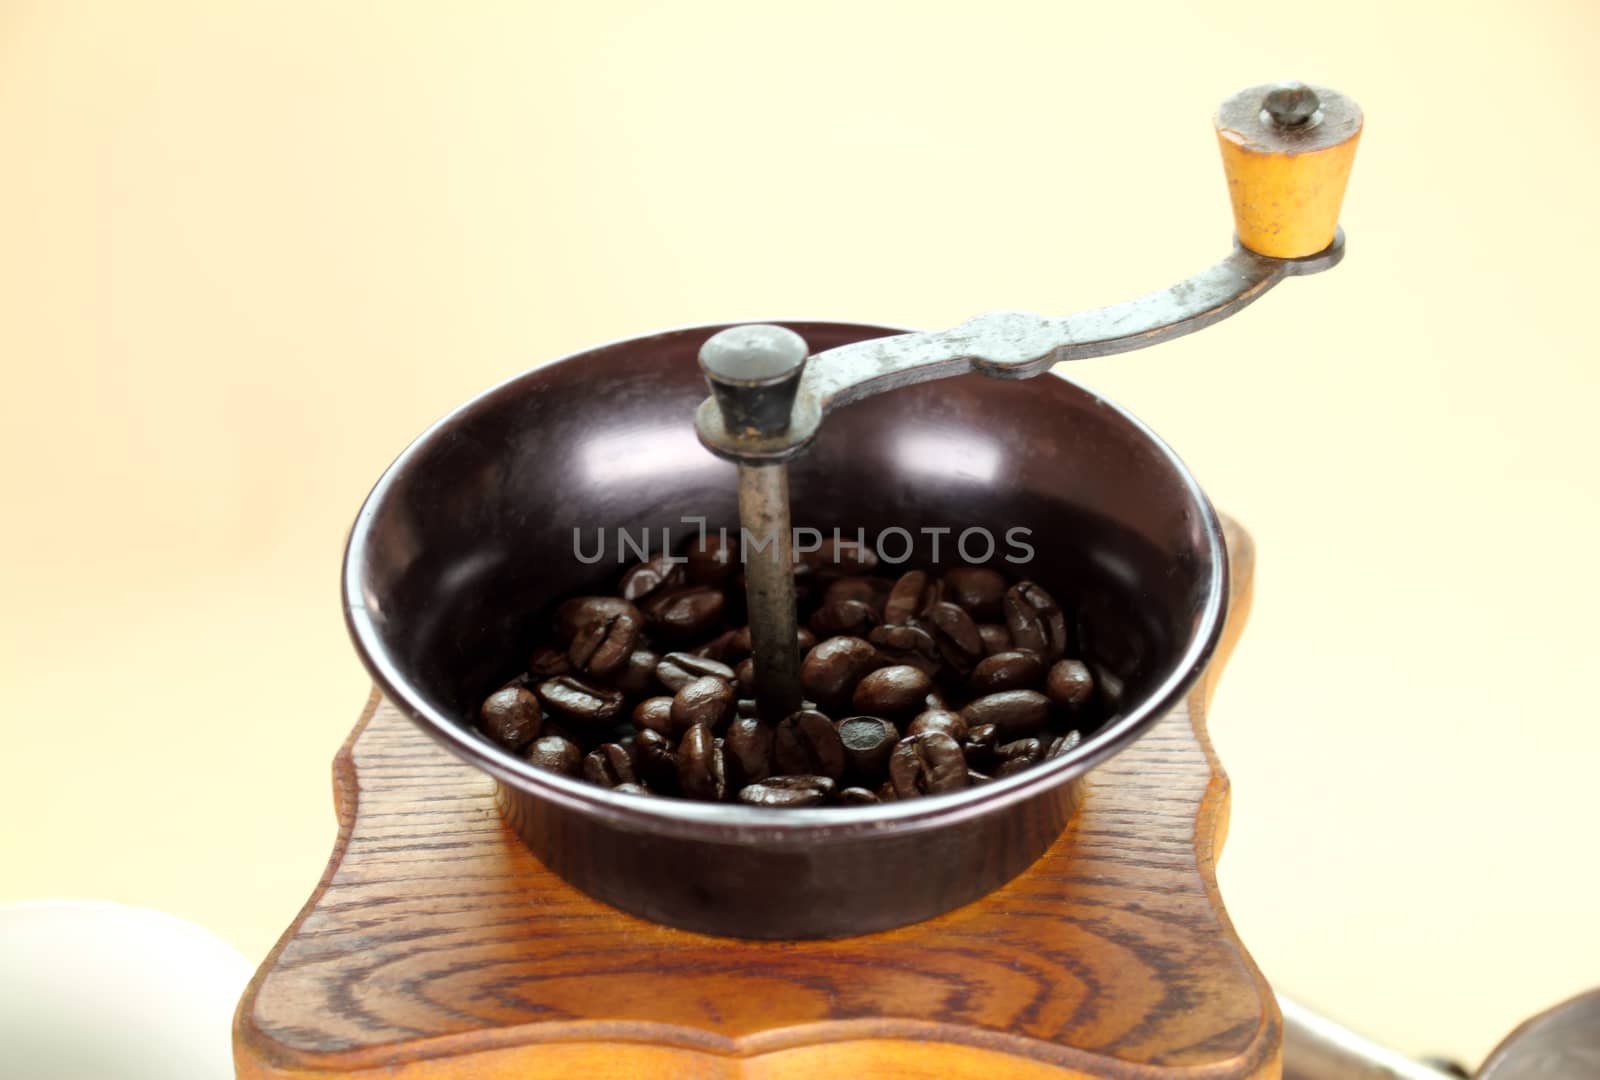 Old fashioned coffee grinder with coffee beans.